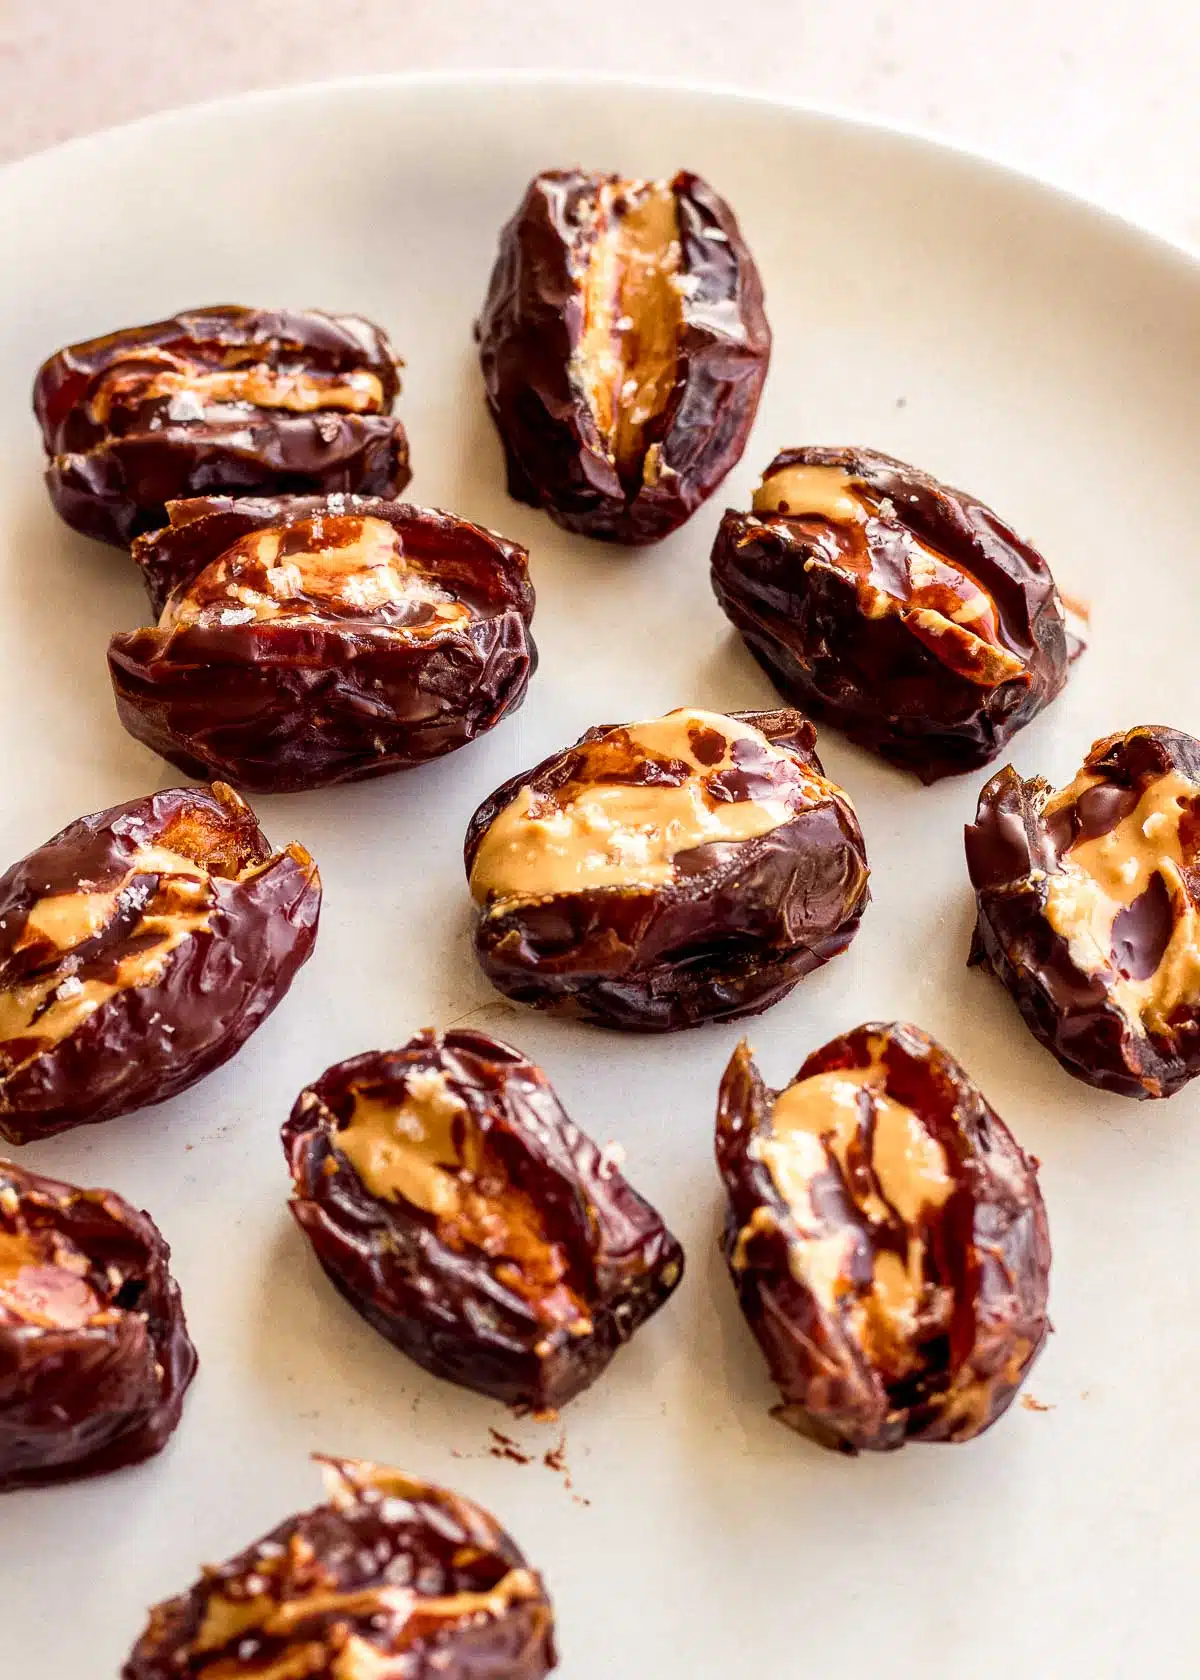 Stuffed dates with peanut butter and chocolate on a plate.